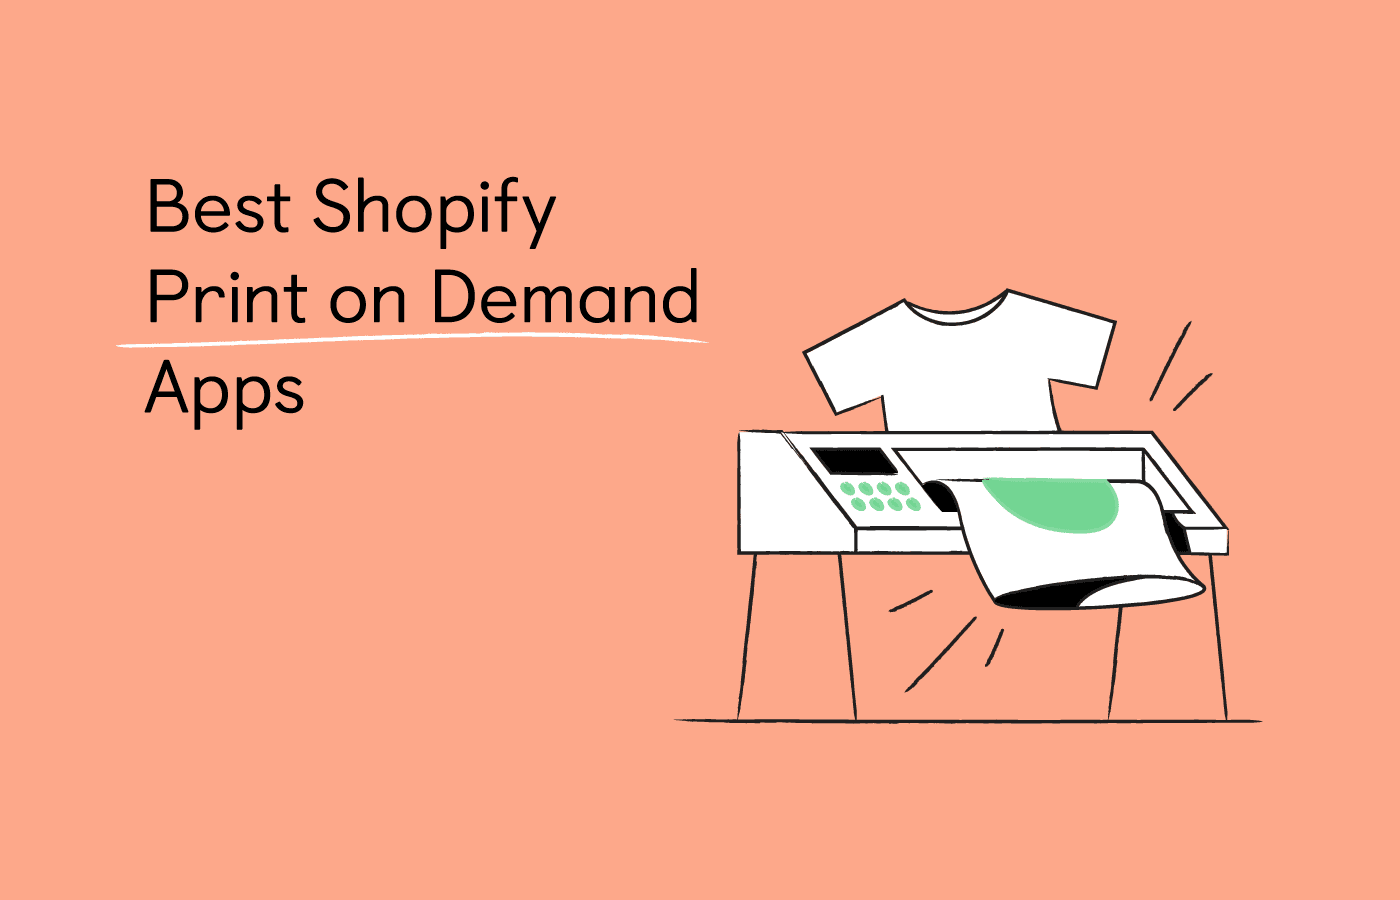 15 Shopify Print on Demand Apps to Use in 2022